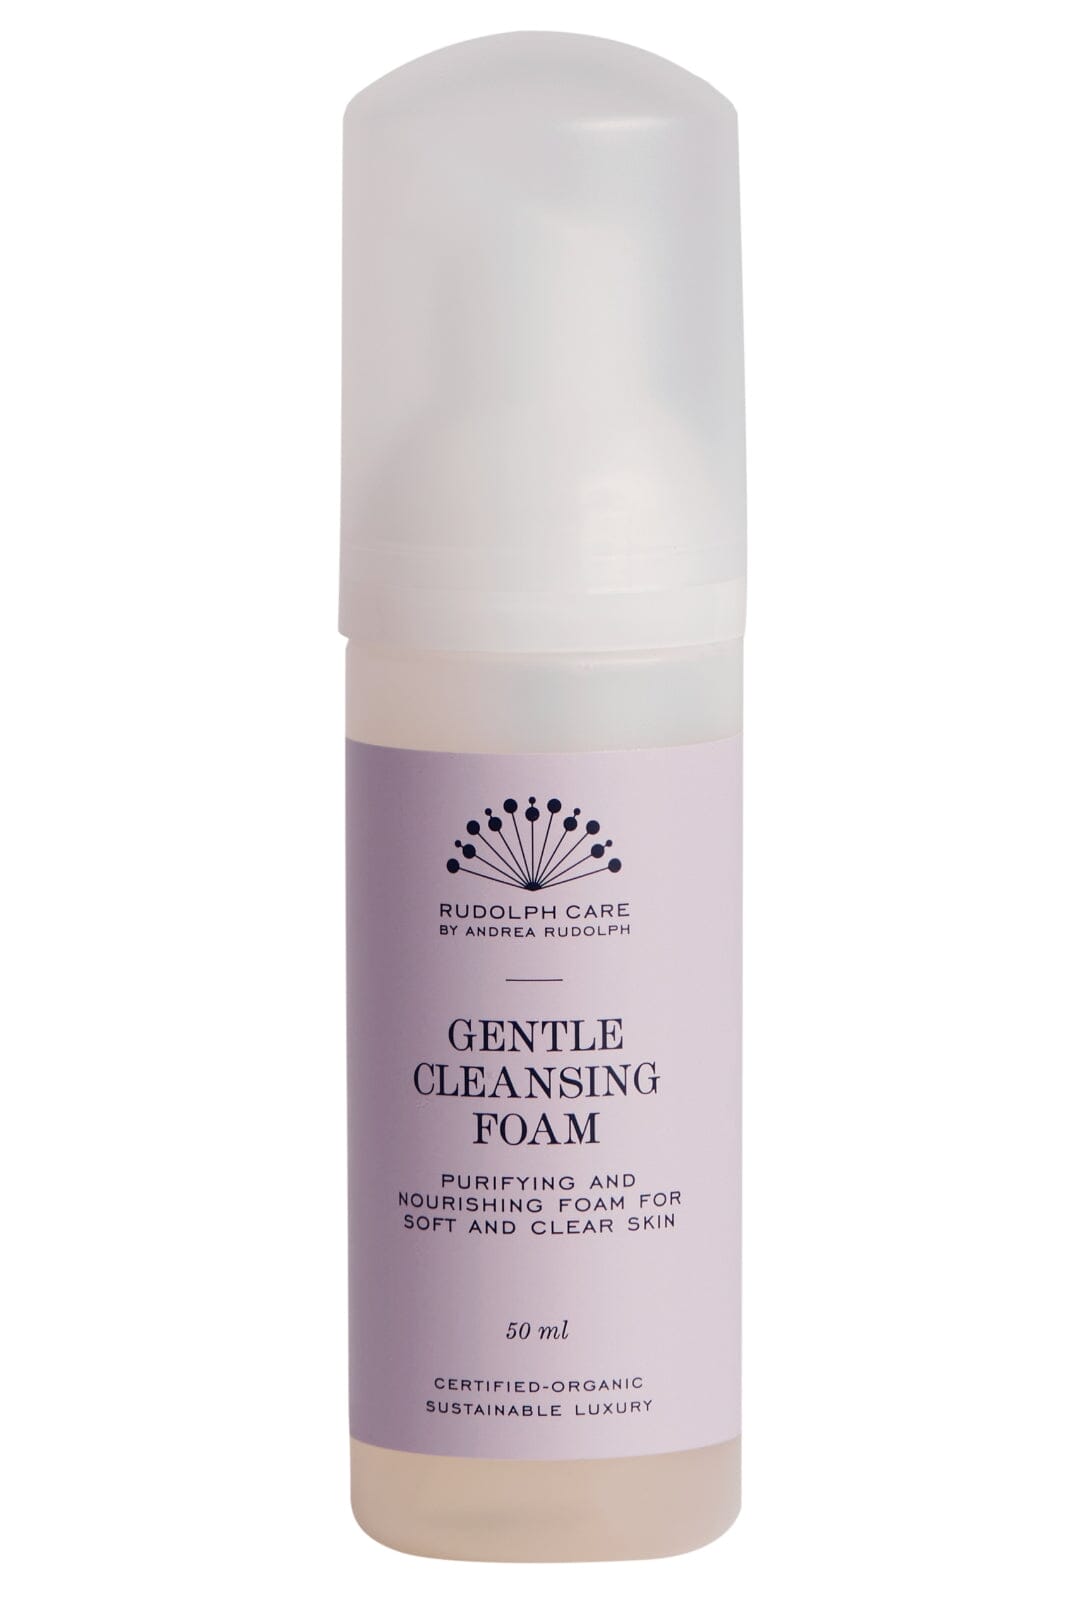 Rudolph Care - Gentle Cleansing Foam Travelsize Rens 